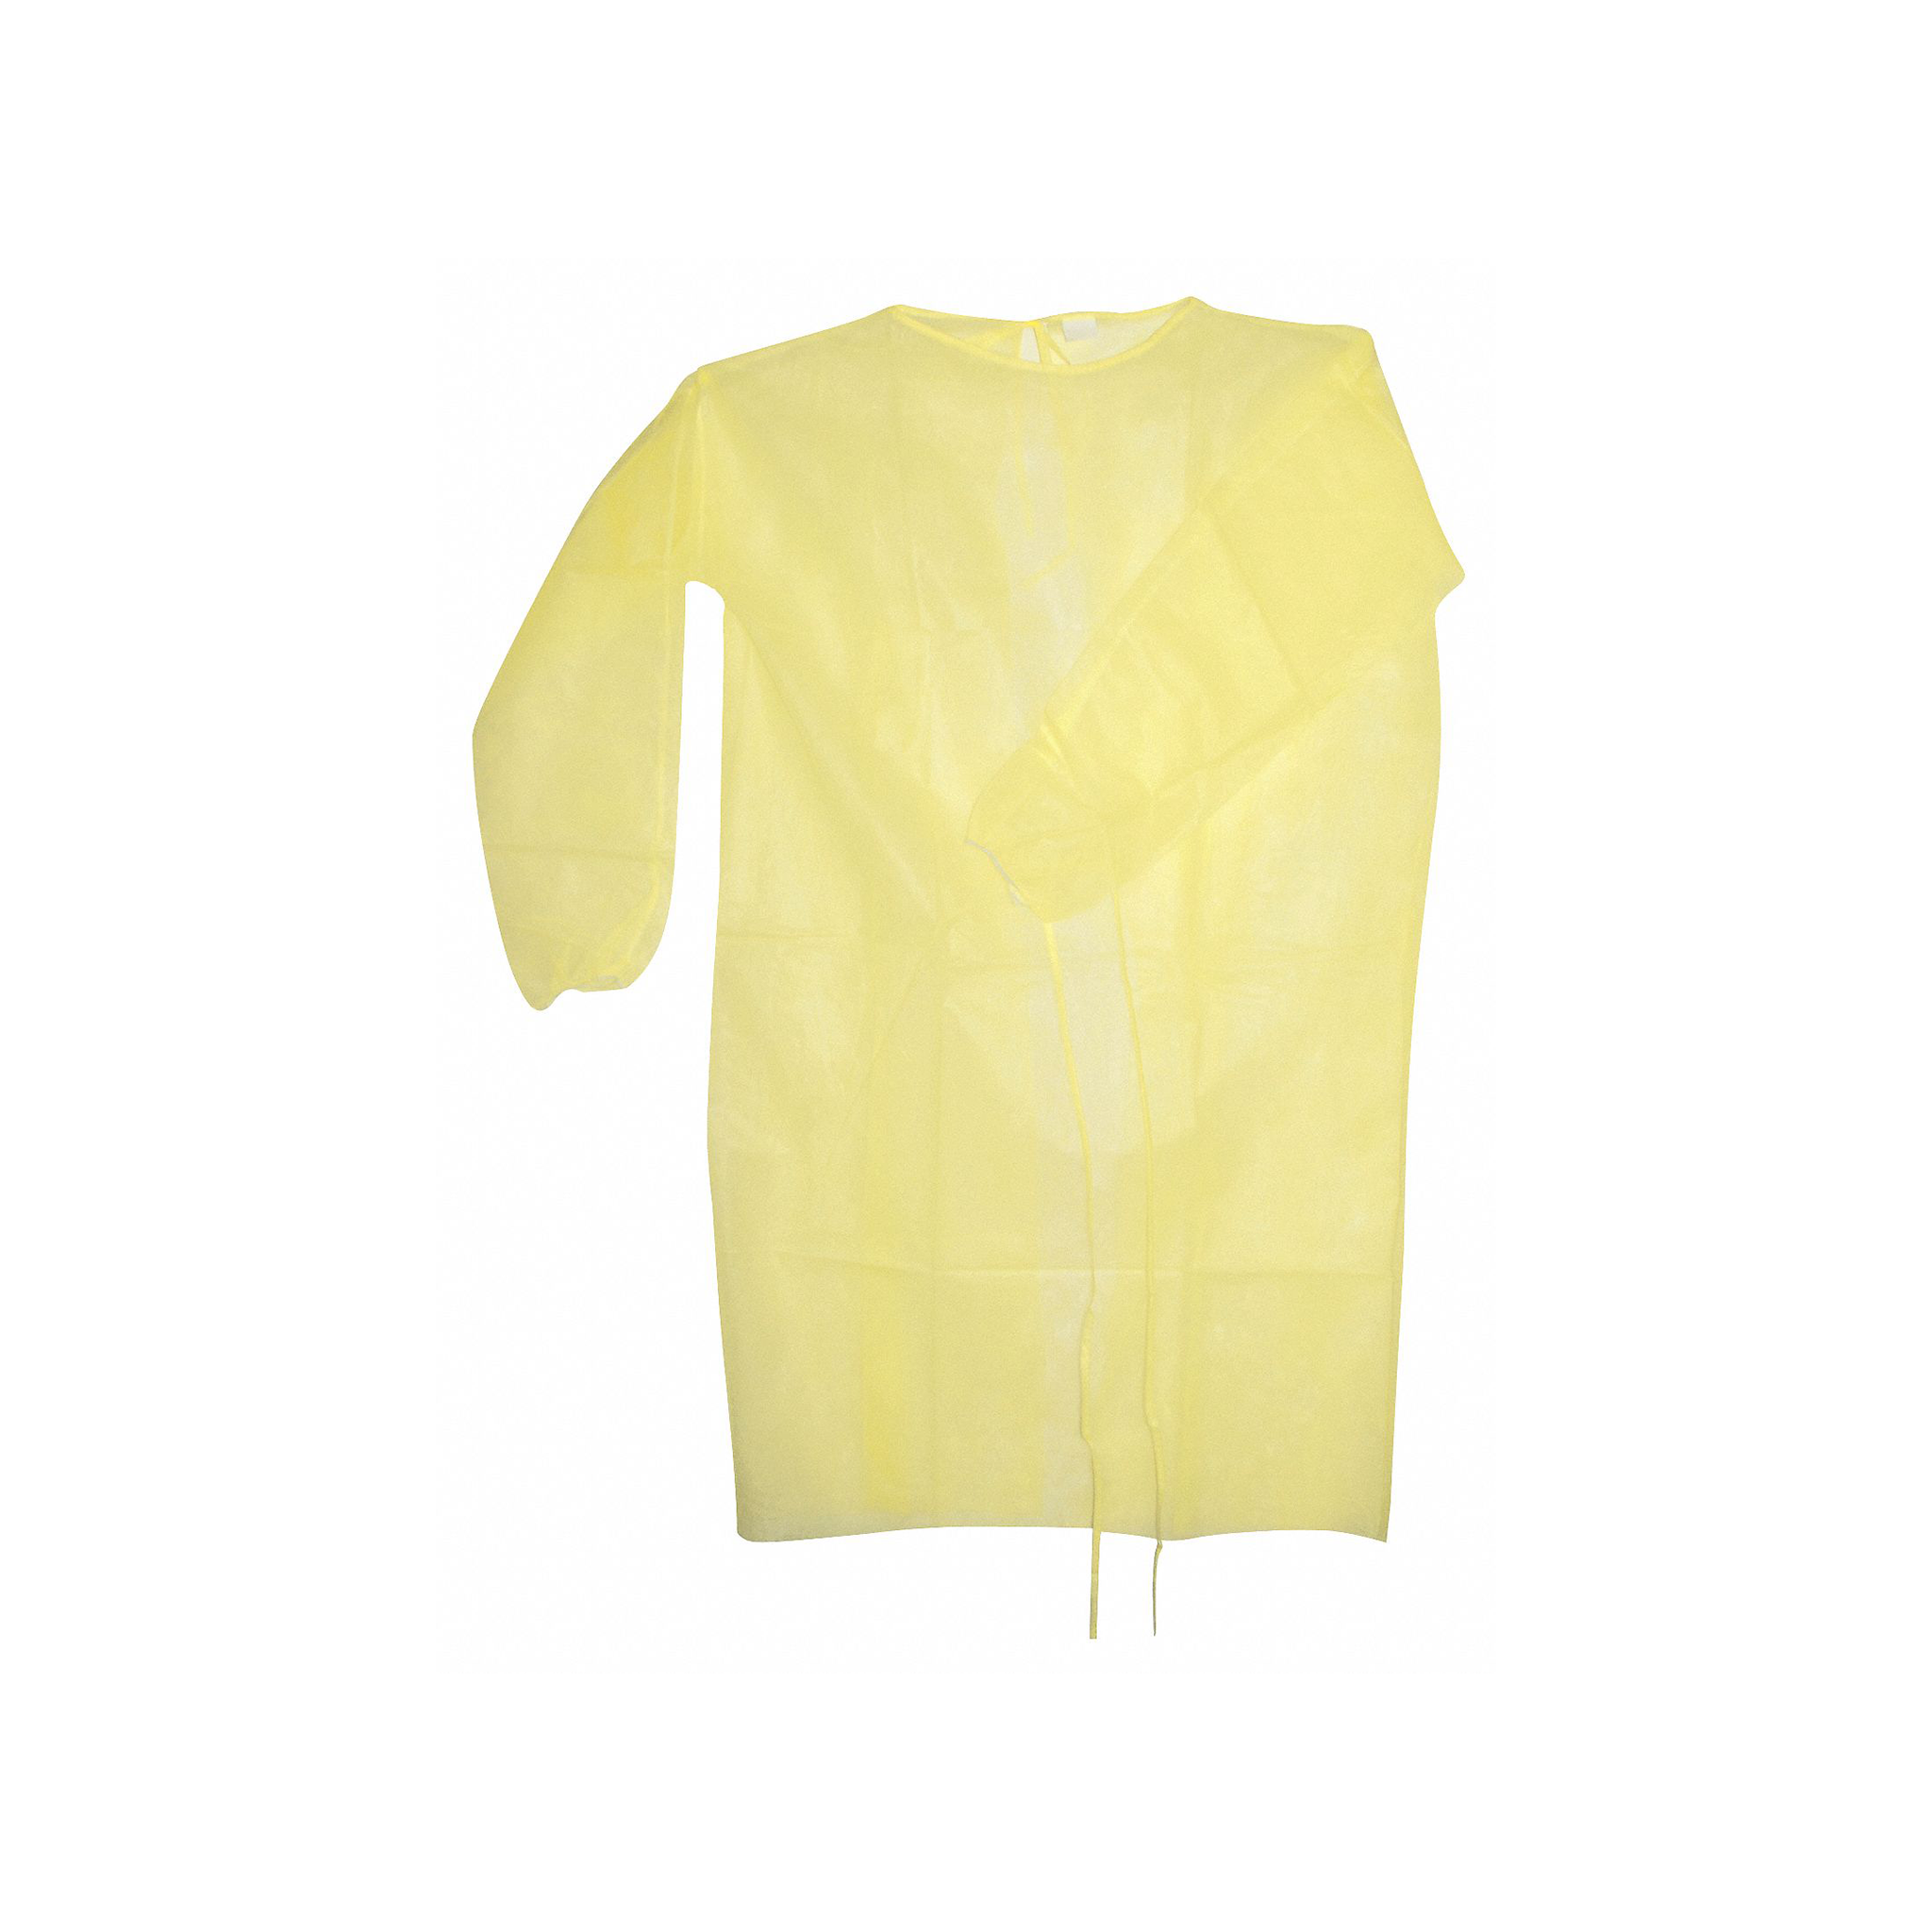 Isolation Gown - 10 pcs, Yellow